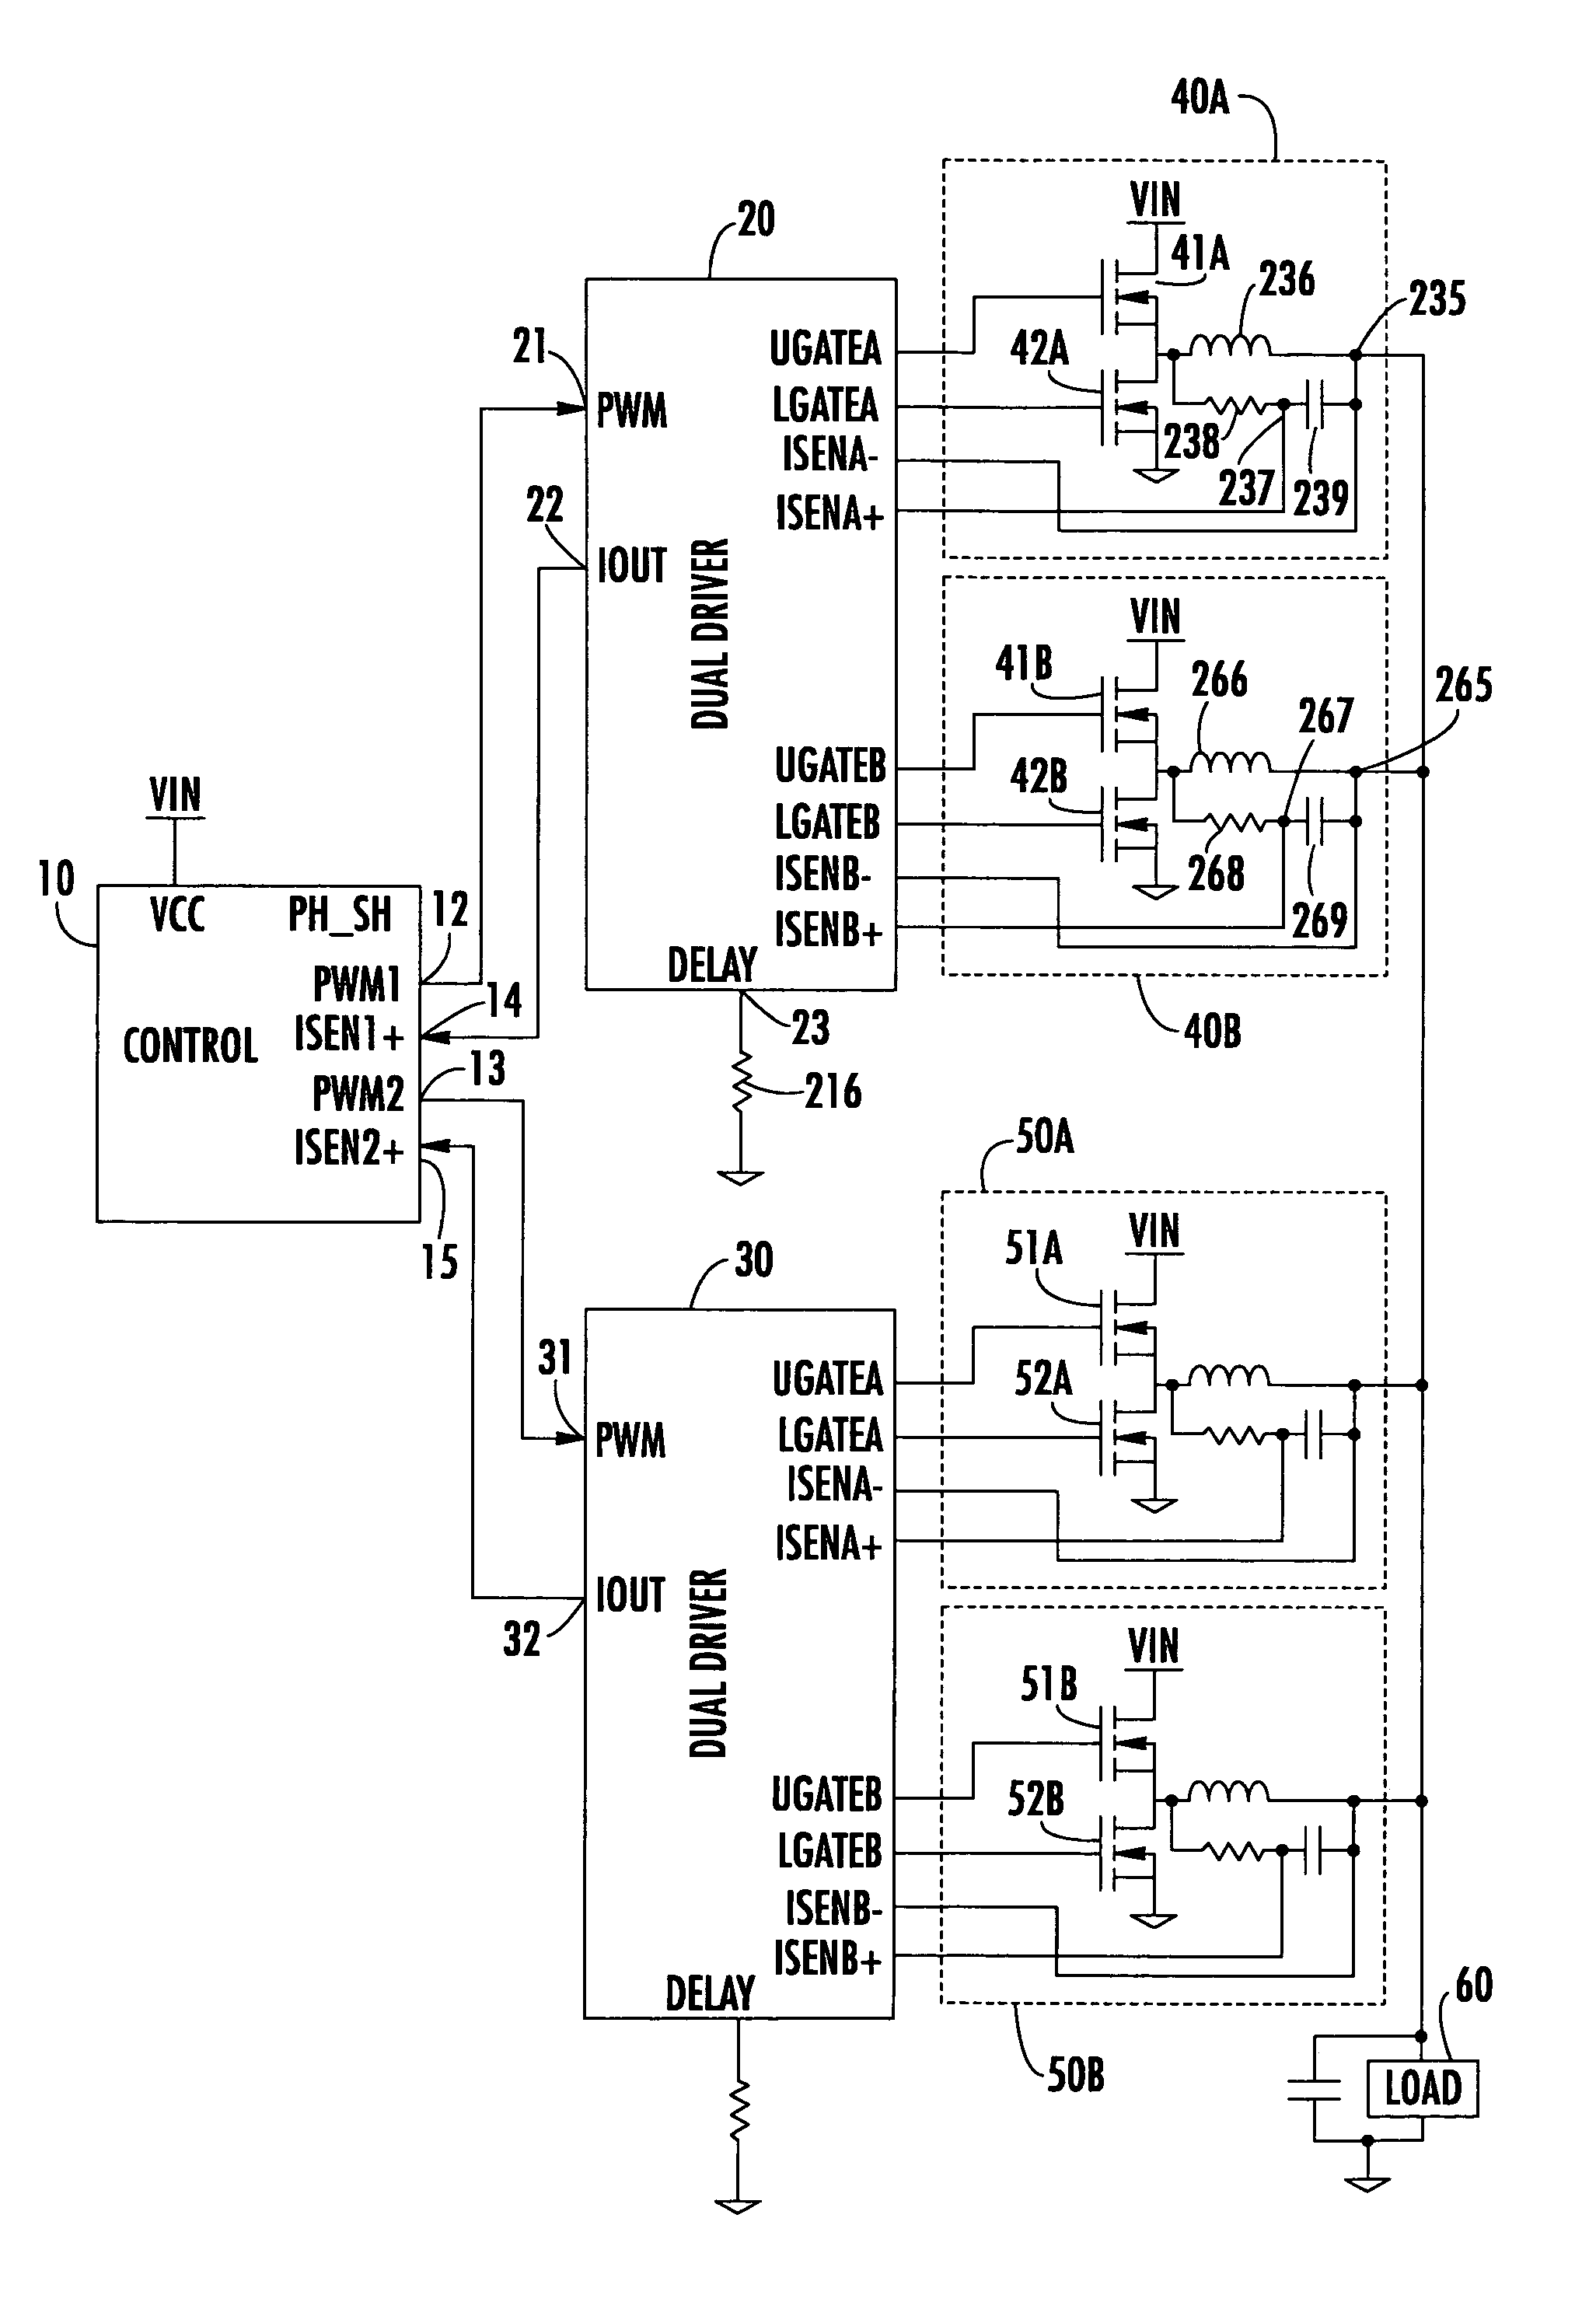 Multi-channel driver interface circuit for increasing phase count in a multi-phase DC-DC converter